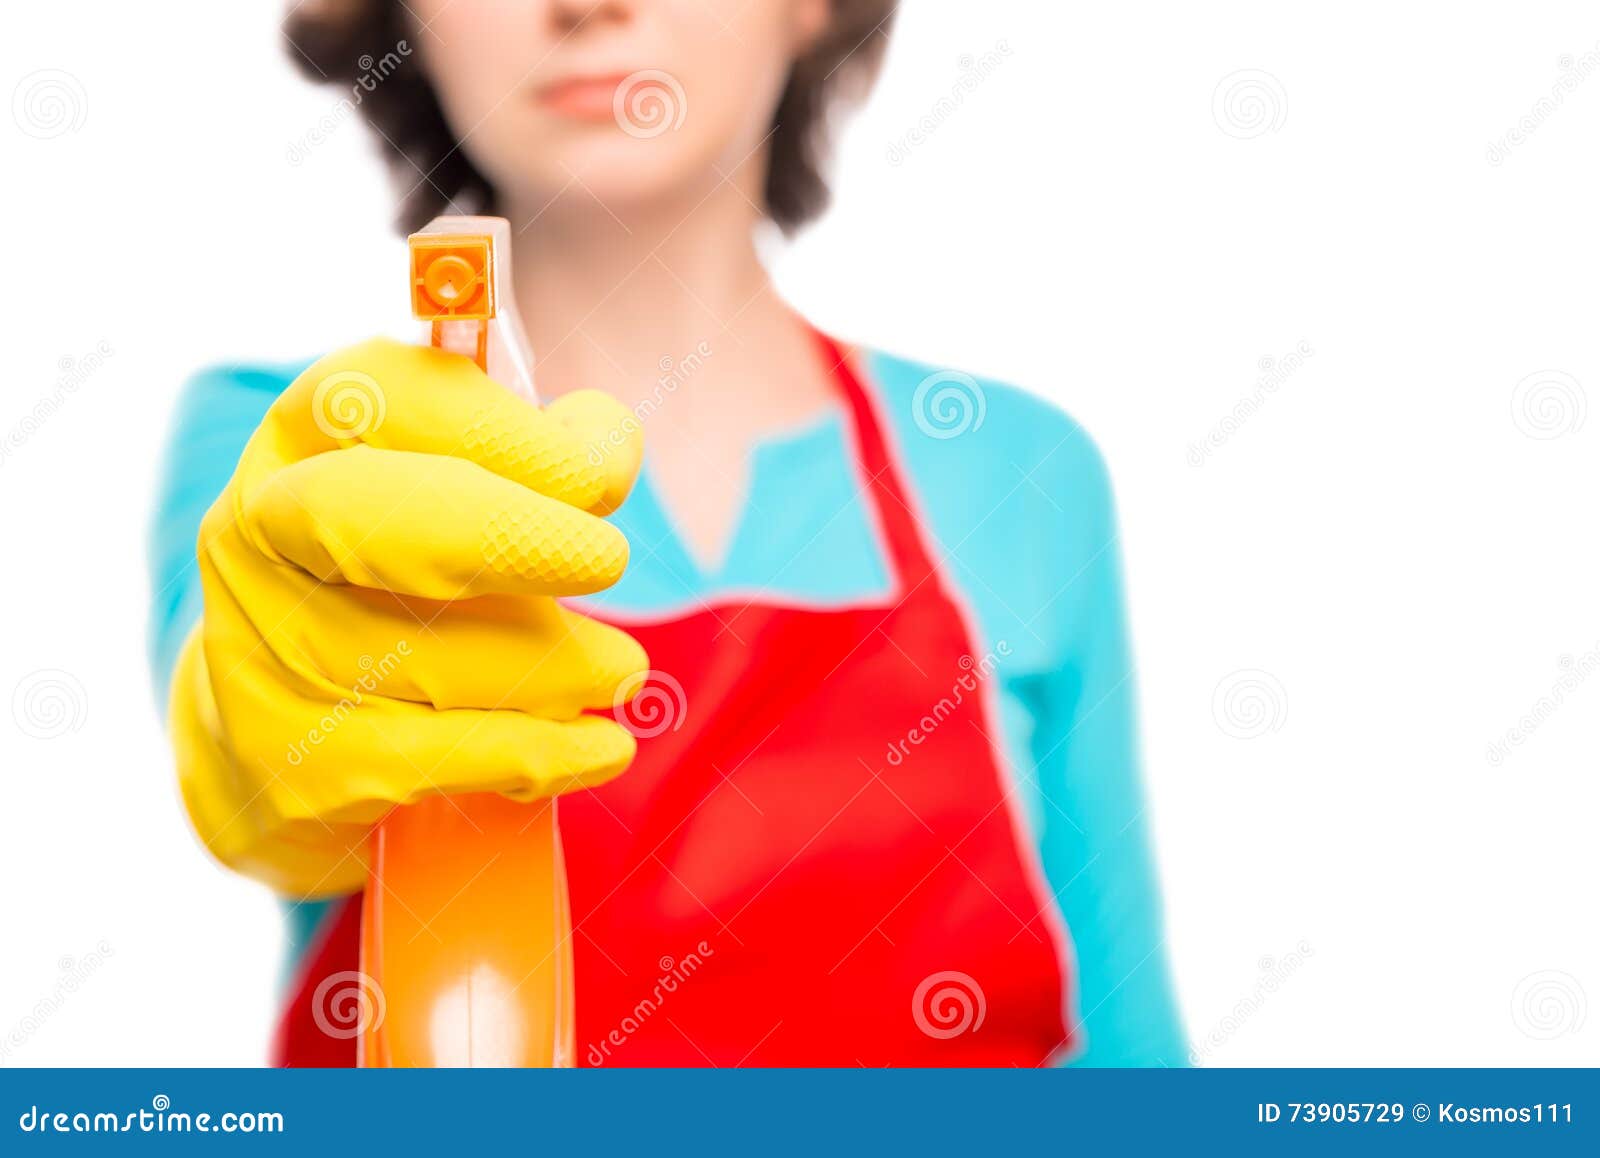 female hand in yellow glove directs the cleaning spray